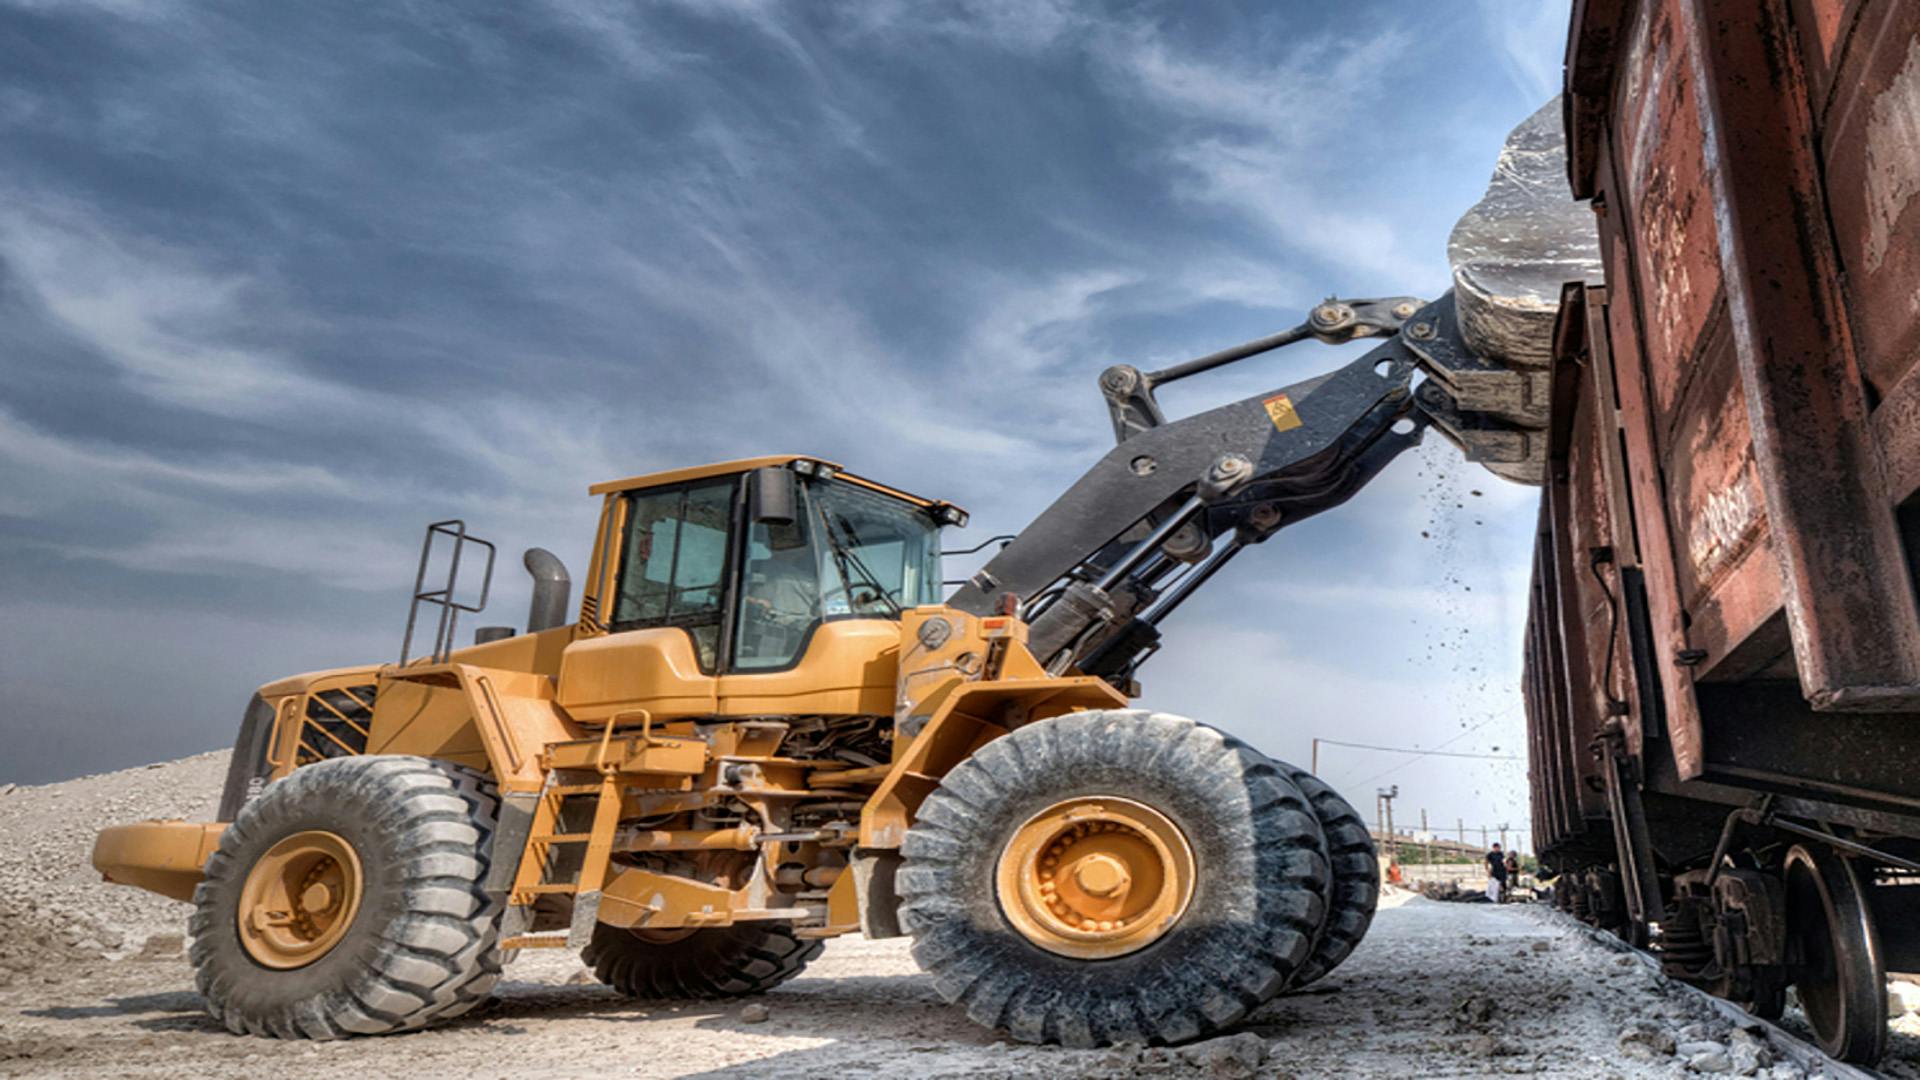 Benefits of the digital twin for heavy equipment challenges